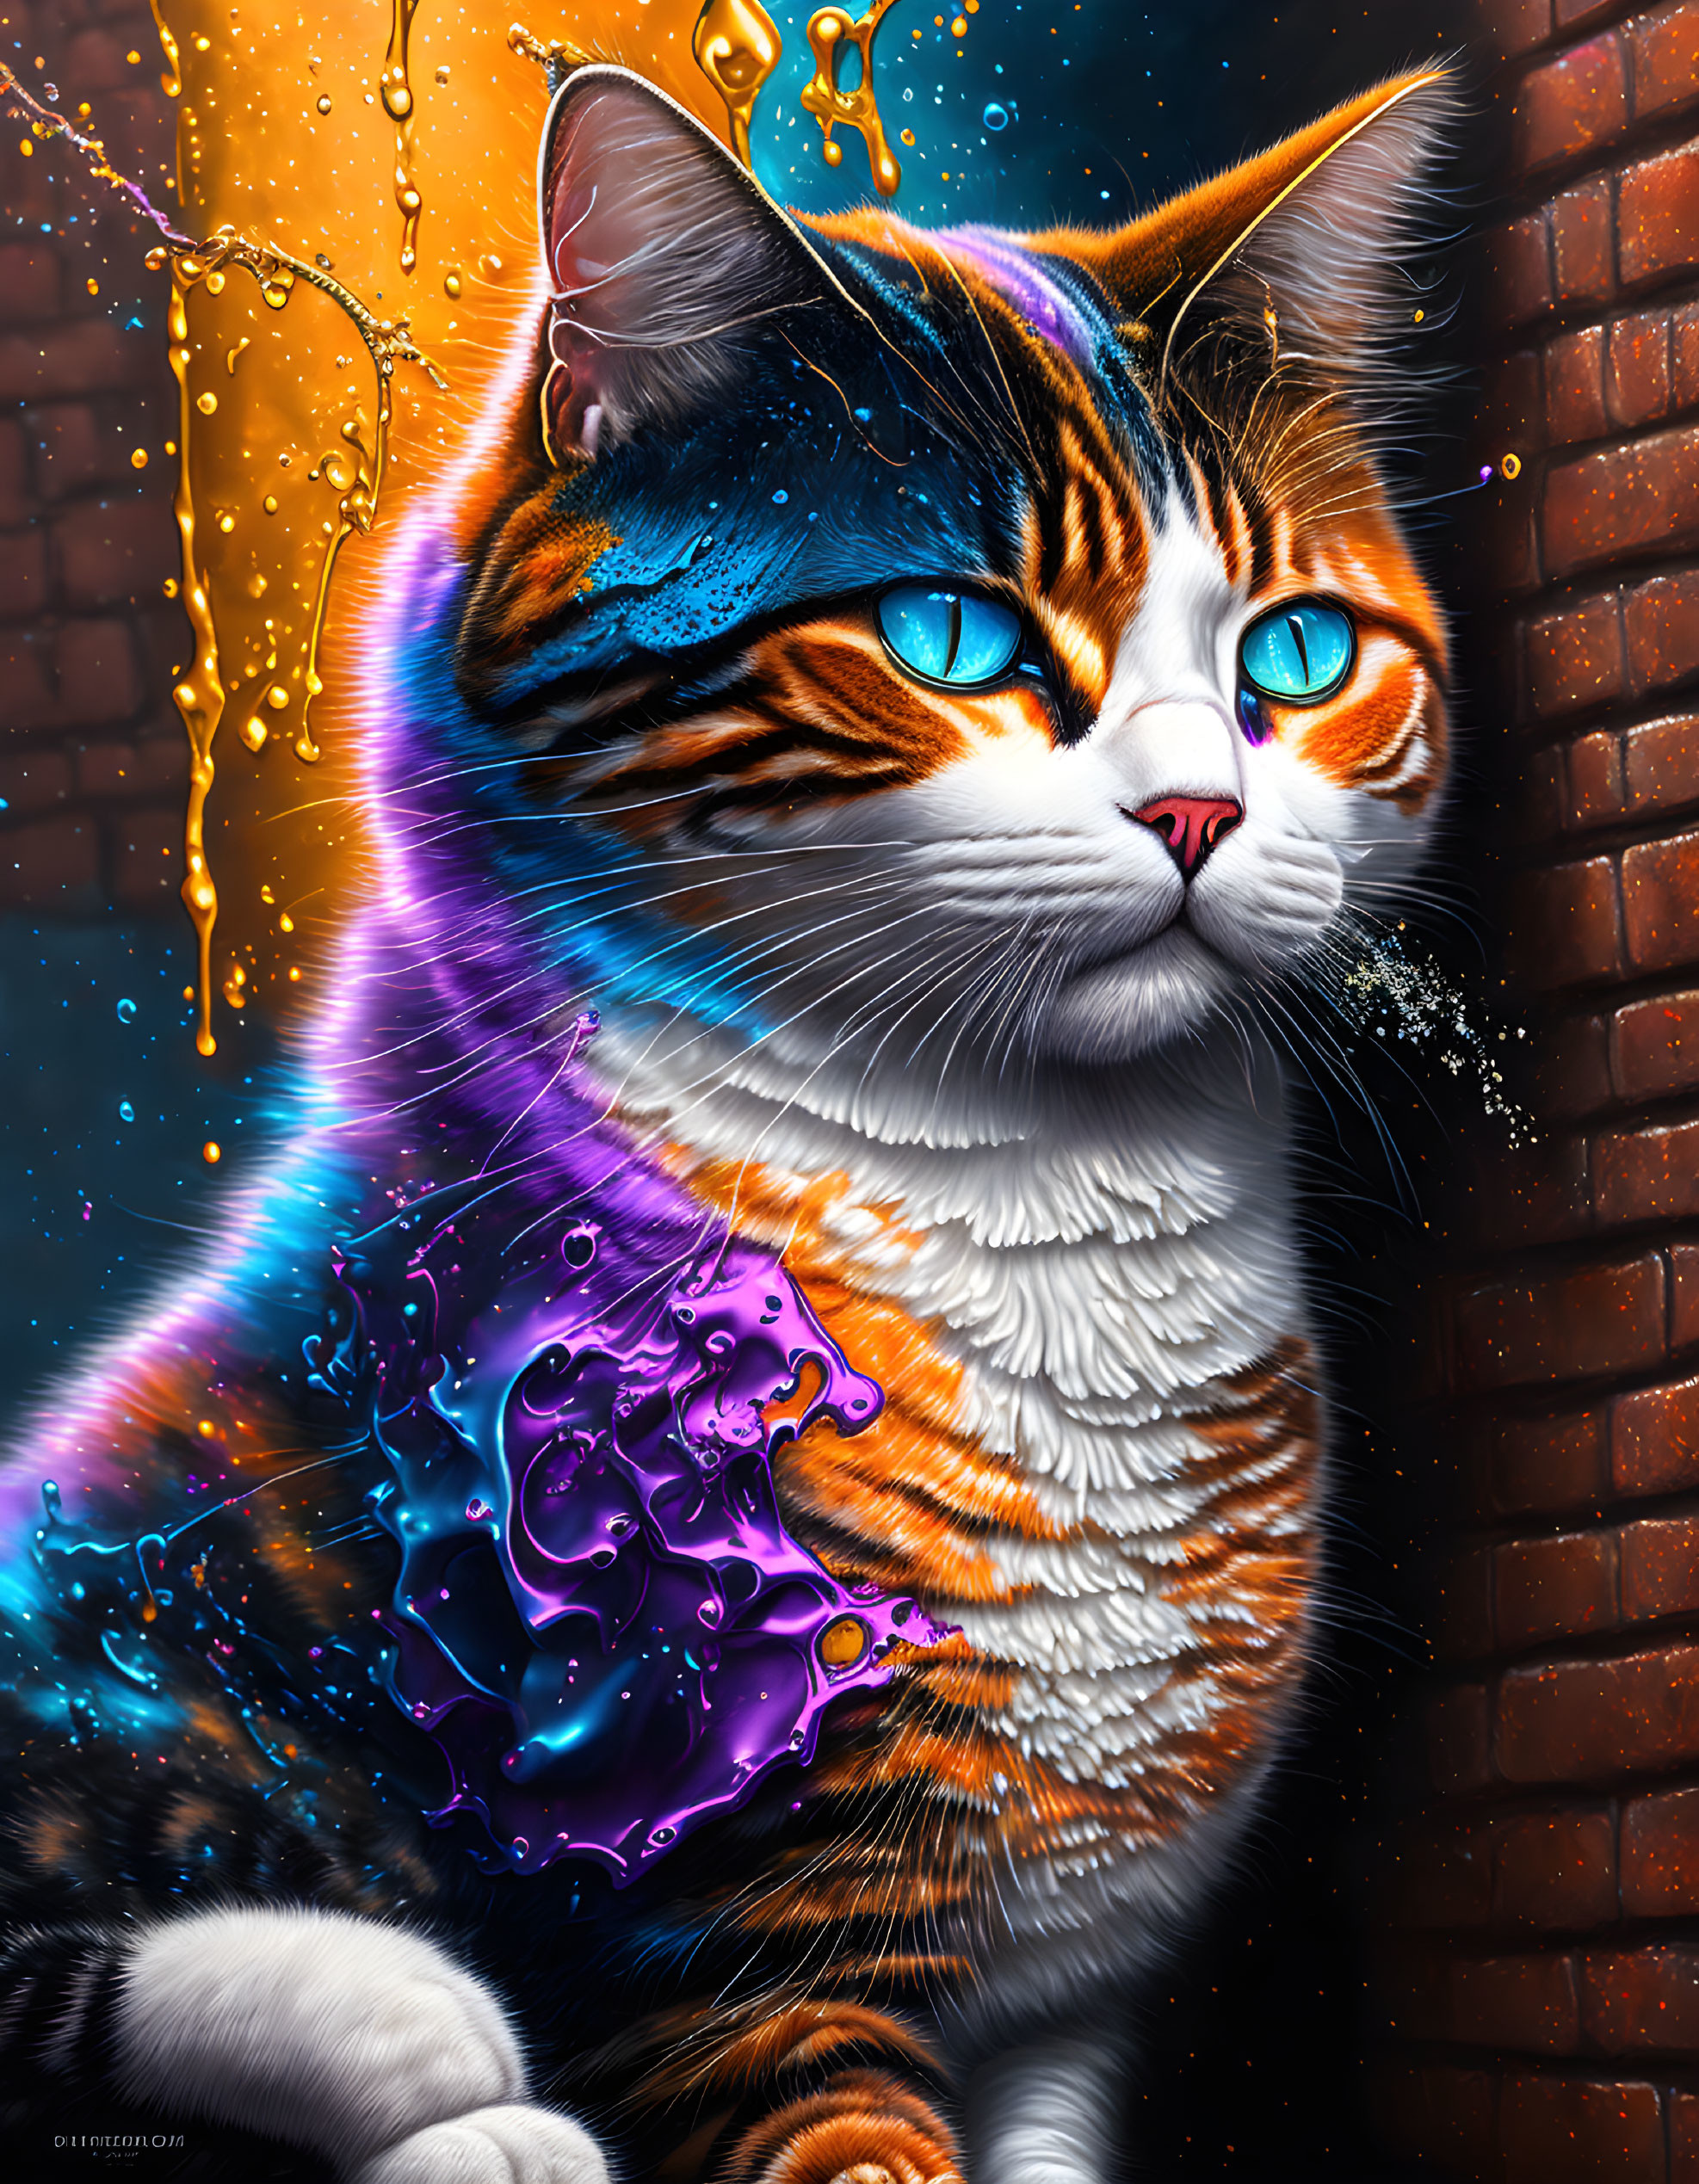 Colorful cat artwork with blue eyes and cosmic pattern on brick wall.